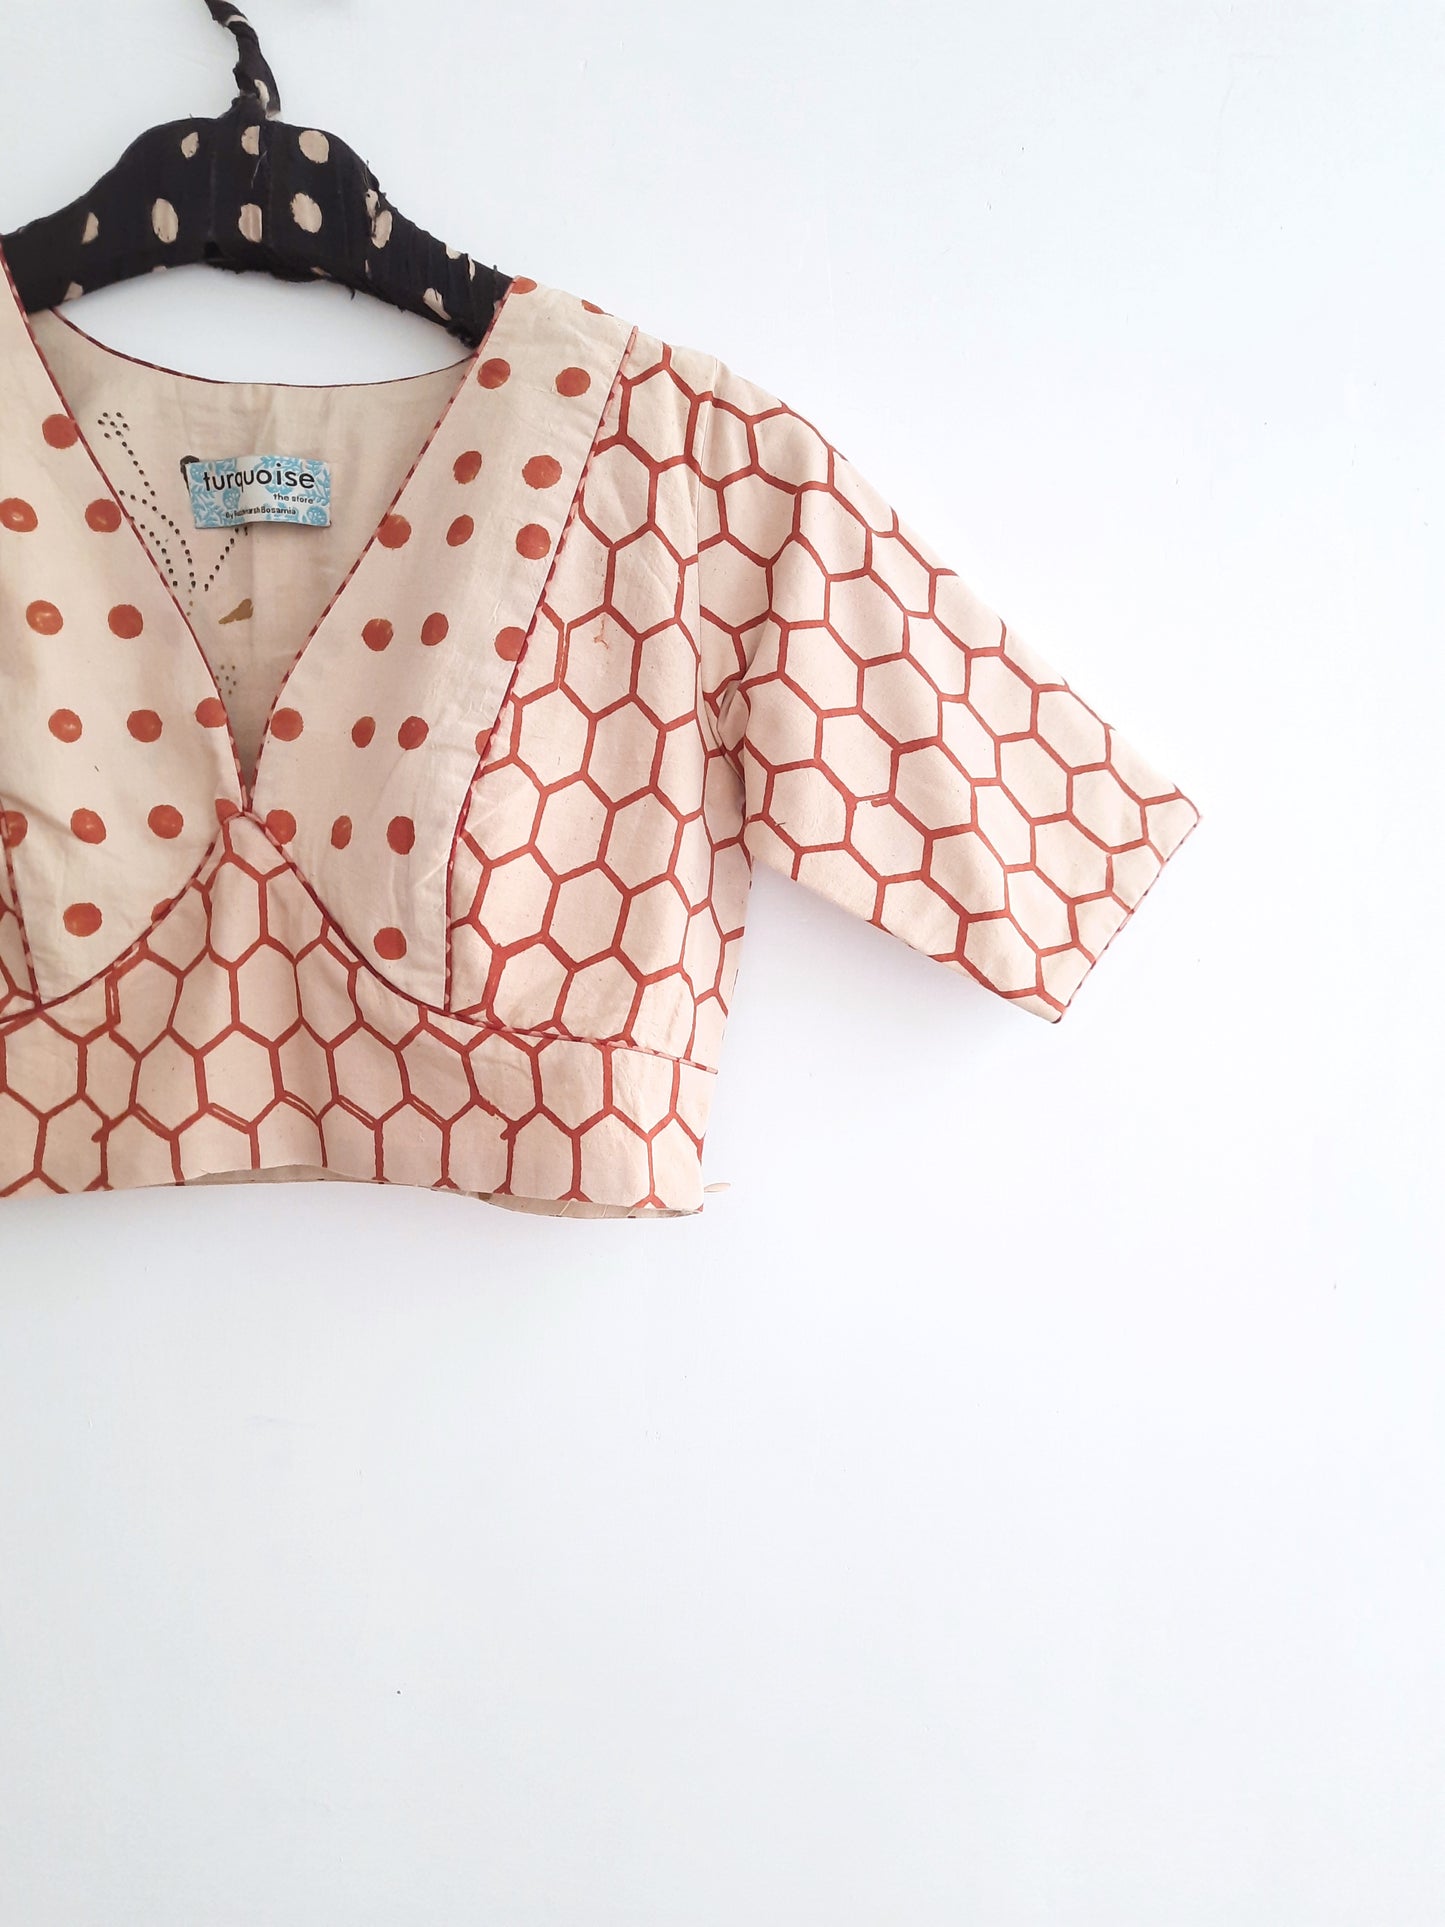 Handmade Ajrakh Blouse: Beige blouse with honeycomb and polka dot prints from Turquoisethestore, showcasing artisanal craftsmanship and natural dyes.